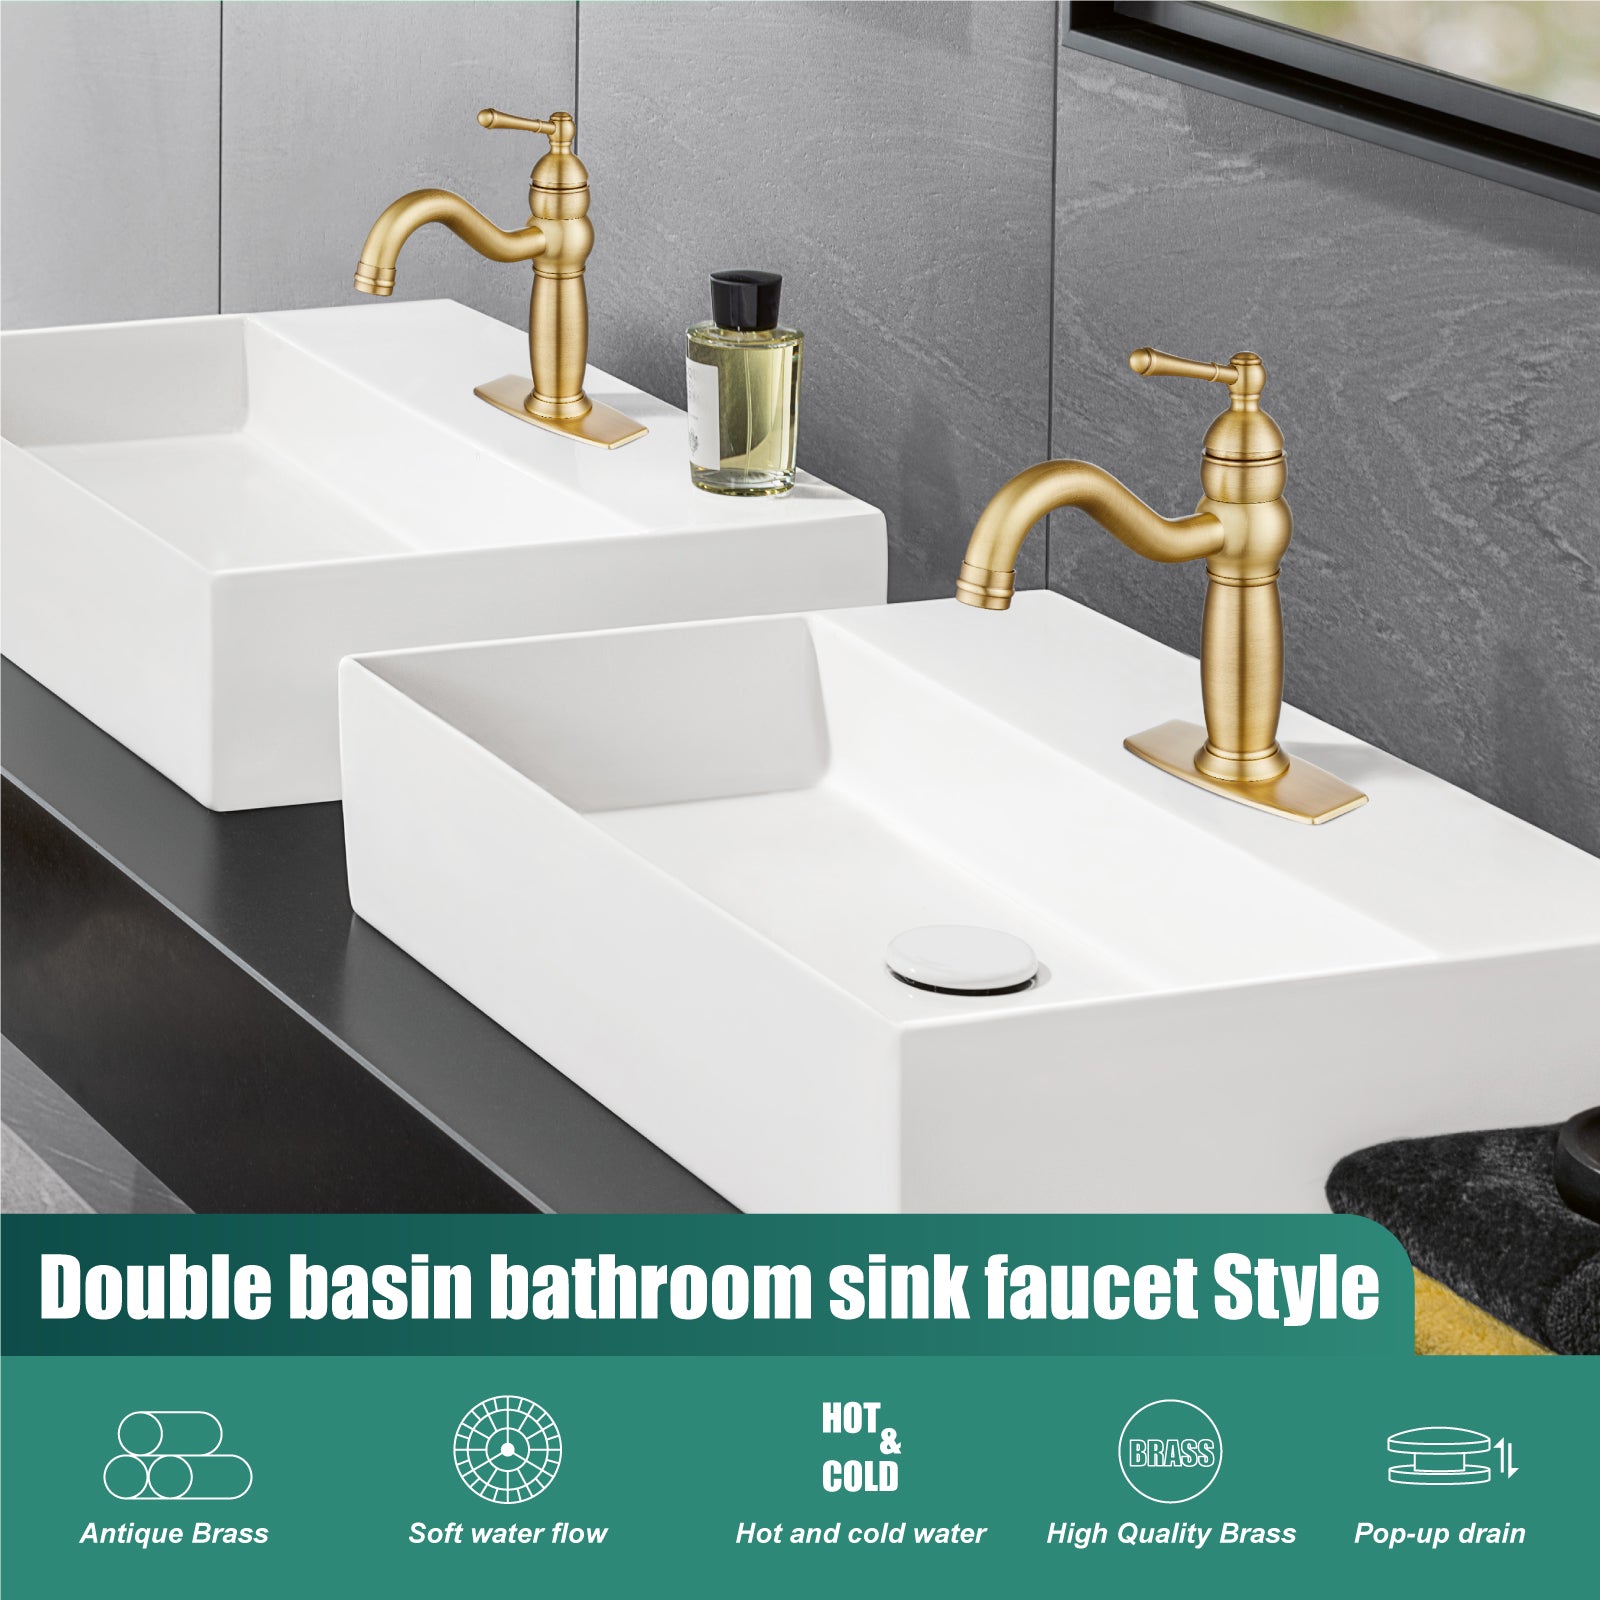 Heyalan Bathroom Faucet Brass Lavatory Sink Faucet Vanity Basin Single Hole Vintage Vessel Mixer Tap Deck Mounted Retro Hot and Cold Water Handle Solid Brass Pop-up Drain Included